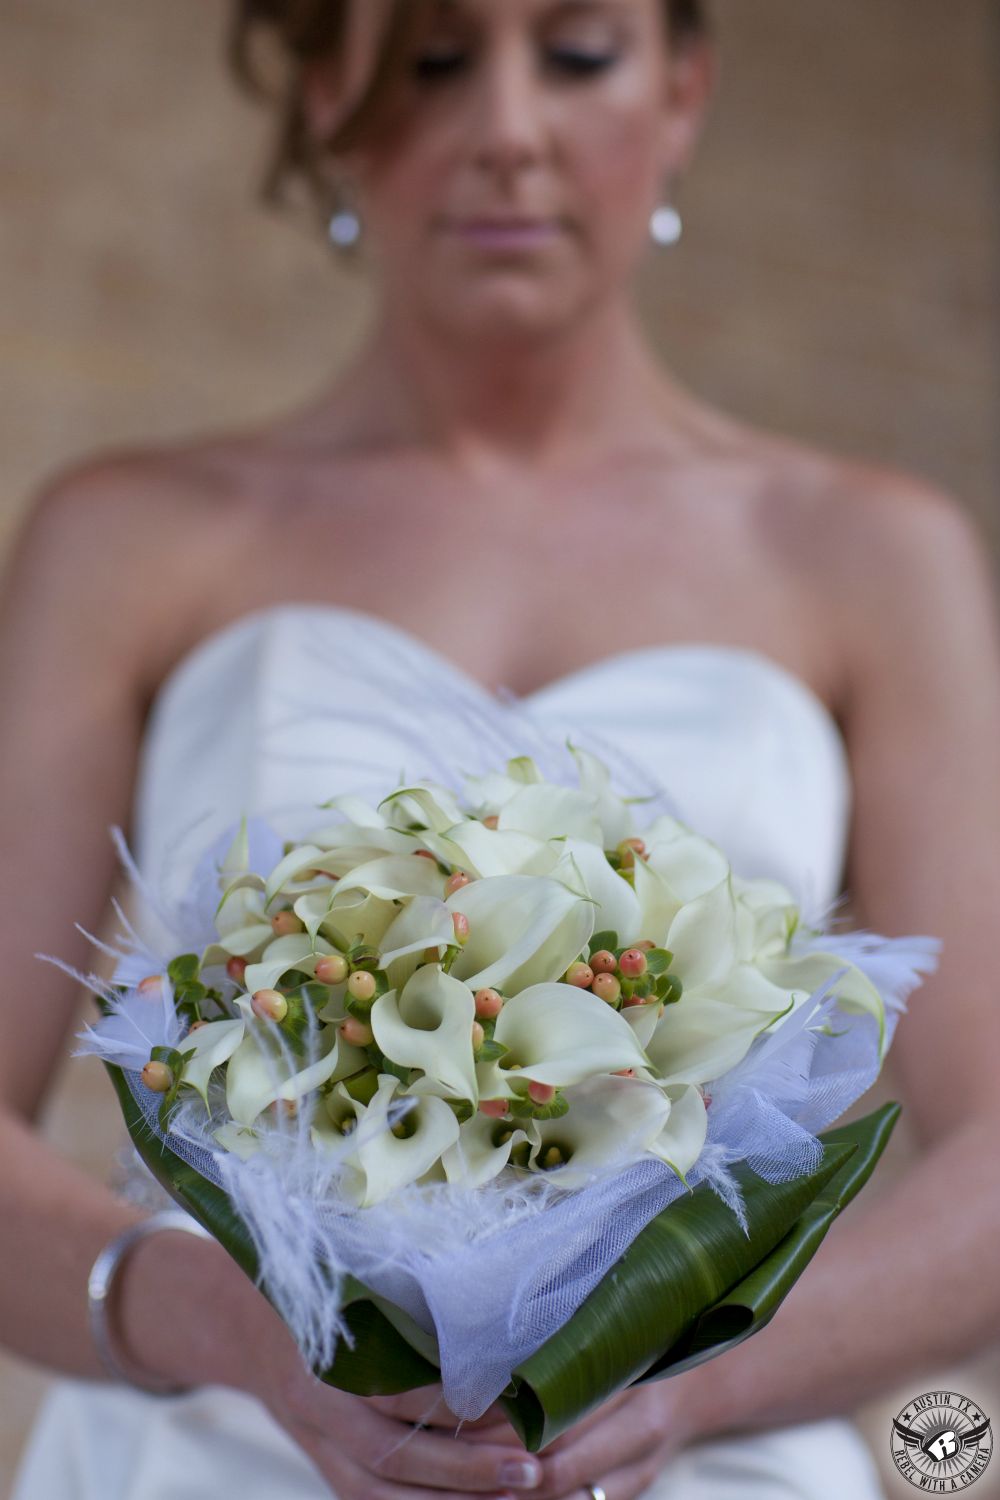 Gorgeous bridal bouquet by the Glass Fountain Austin wedding florist with white calla lillies, white feathers, and yellow orange Hypericum Berries held by the bride in a strapless wedding dress at the Etter-Harbin Alumni Center wedding venue on the University of Texas campus.